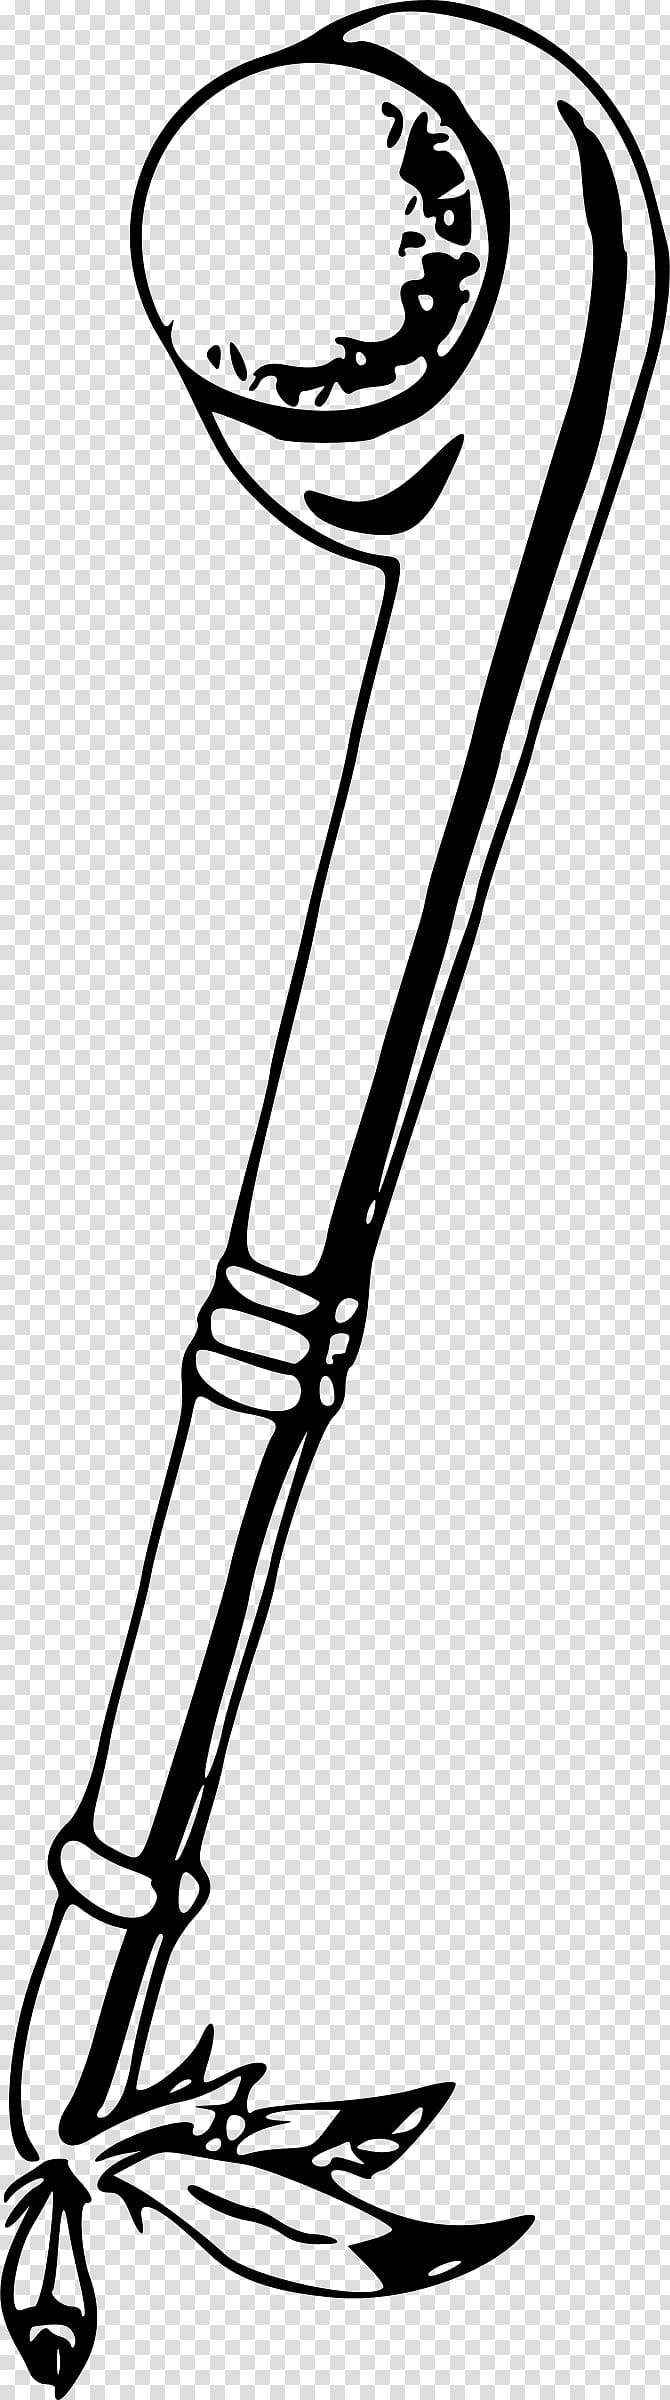 Tomahawk Drawing Indigenous peoples of the Americas Coloring book Knife, axe transparent background PNG clipart